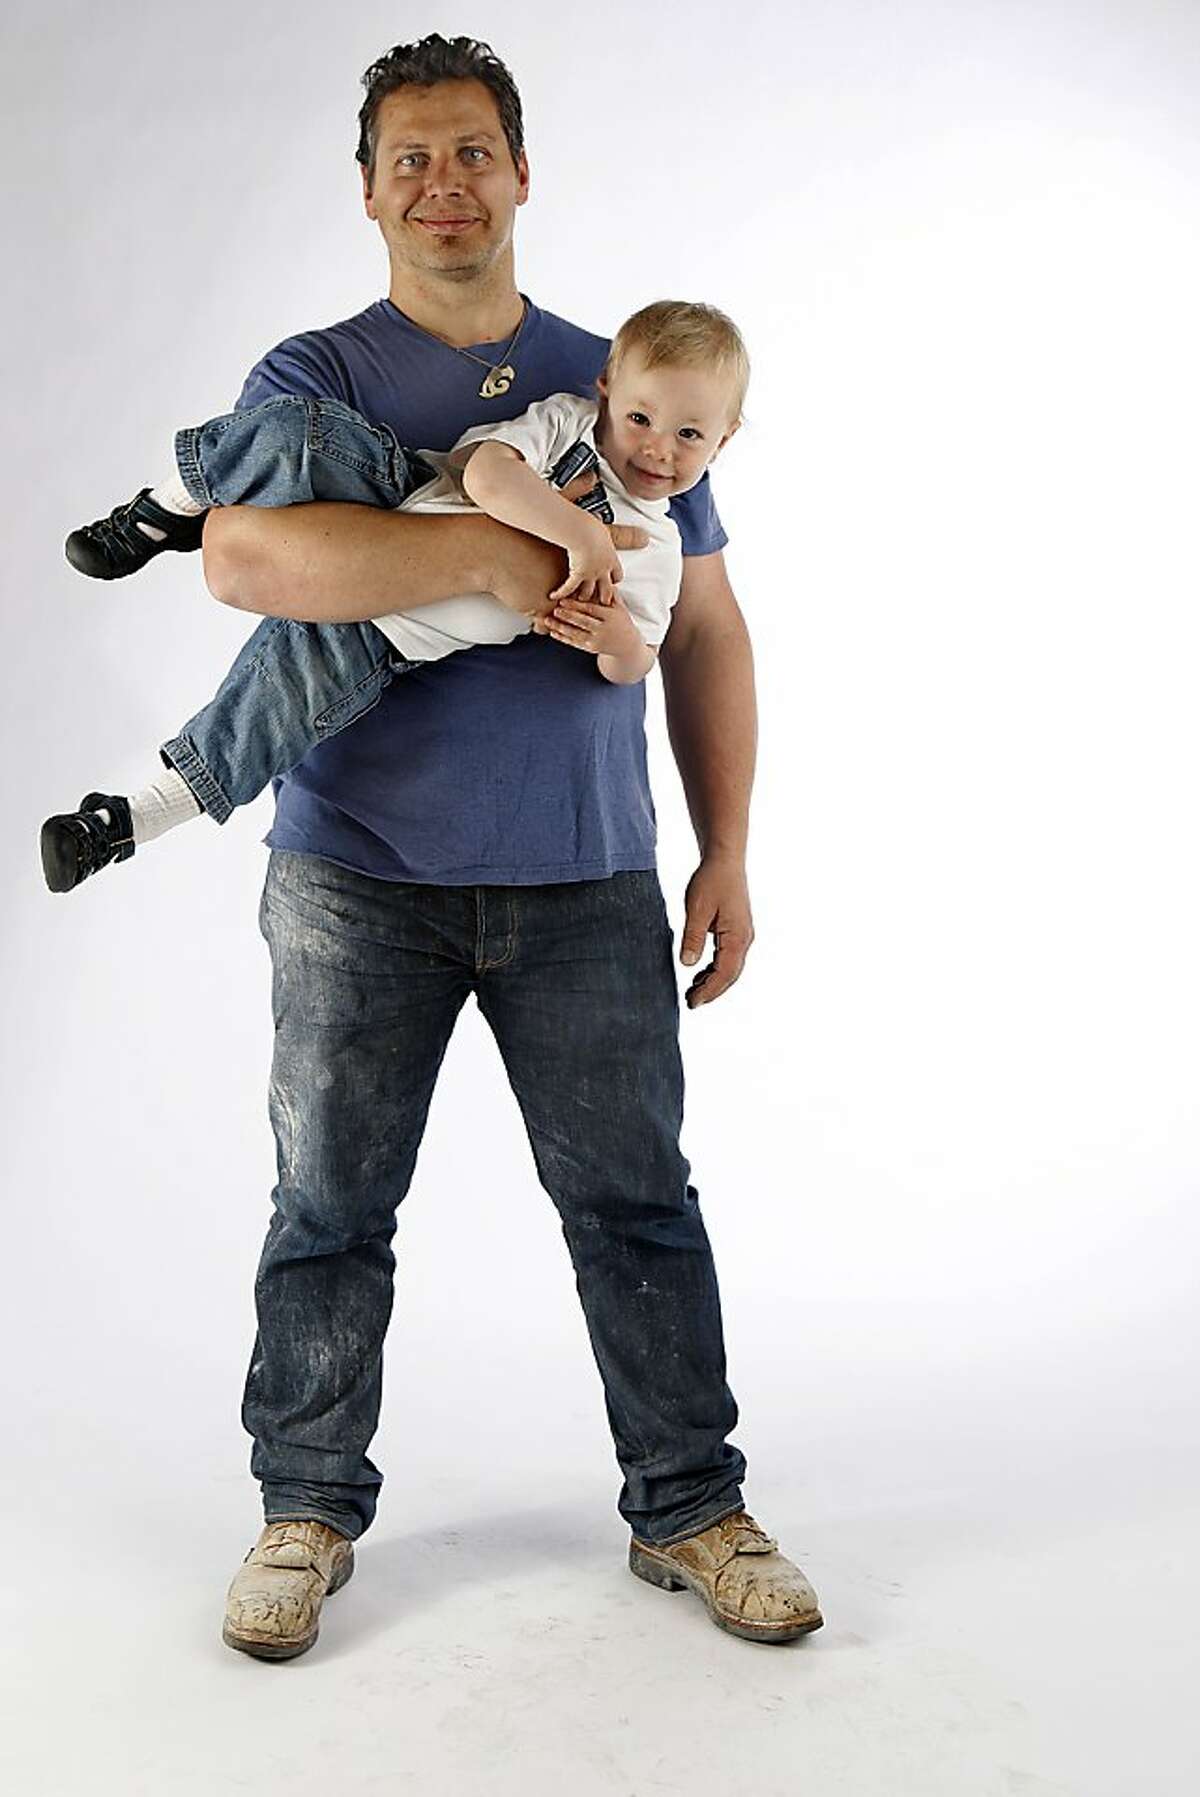 Potter Jered Nelson with his 17 month old son Jack Nelson being photographed in San Francisco, California, on Tuesday, May 29, 2012.